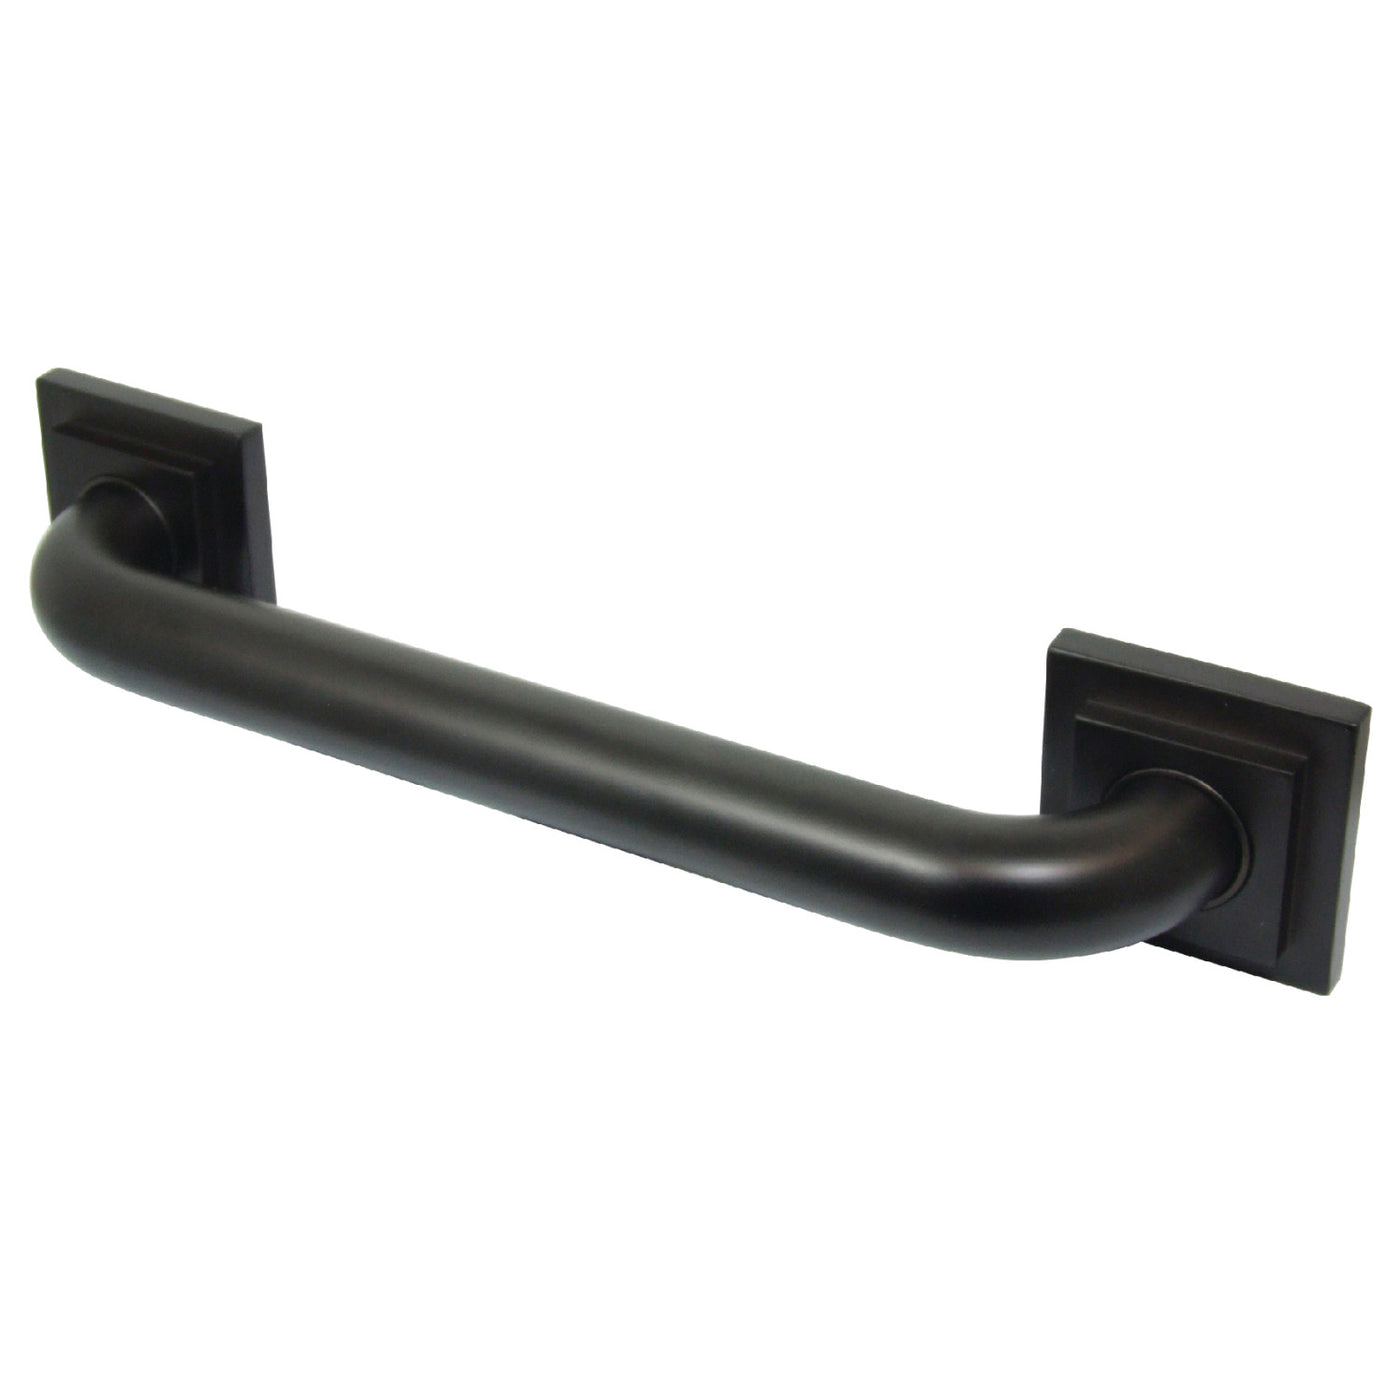 Elements of Design EDR614325 32-Inch x 1-1/4-Inch O.D Grab Bar, Oil Rubbed Bronze